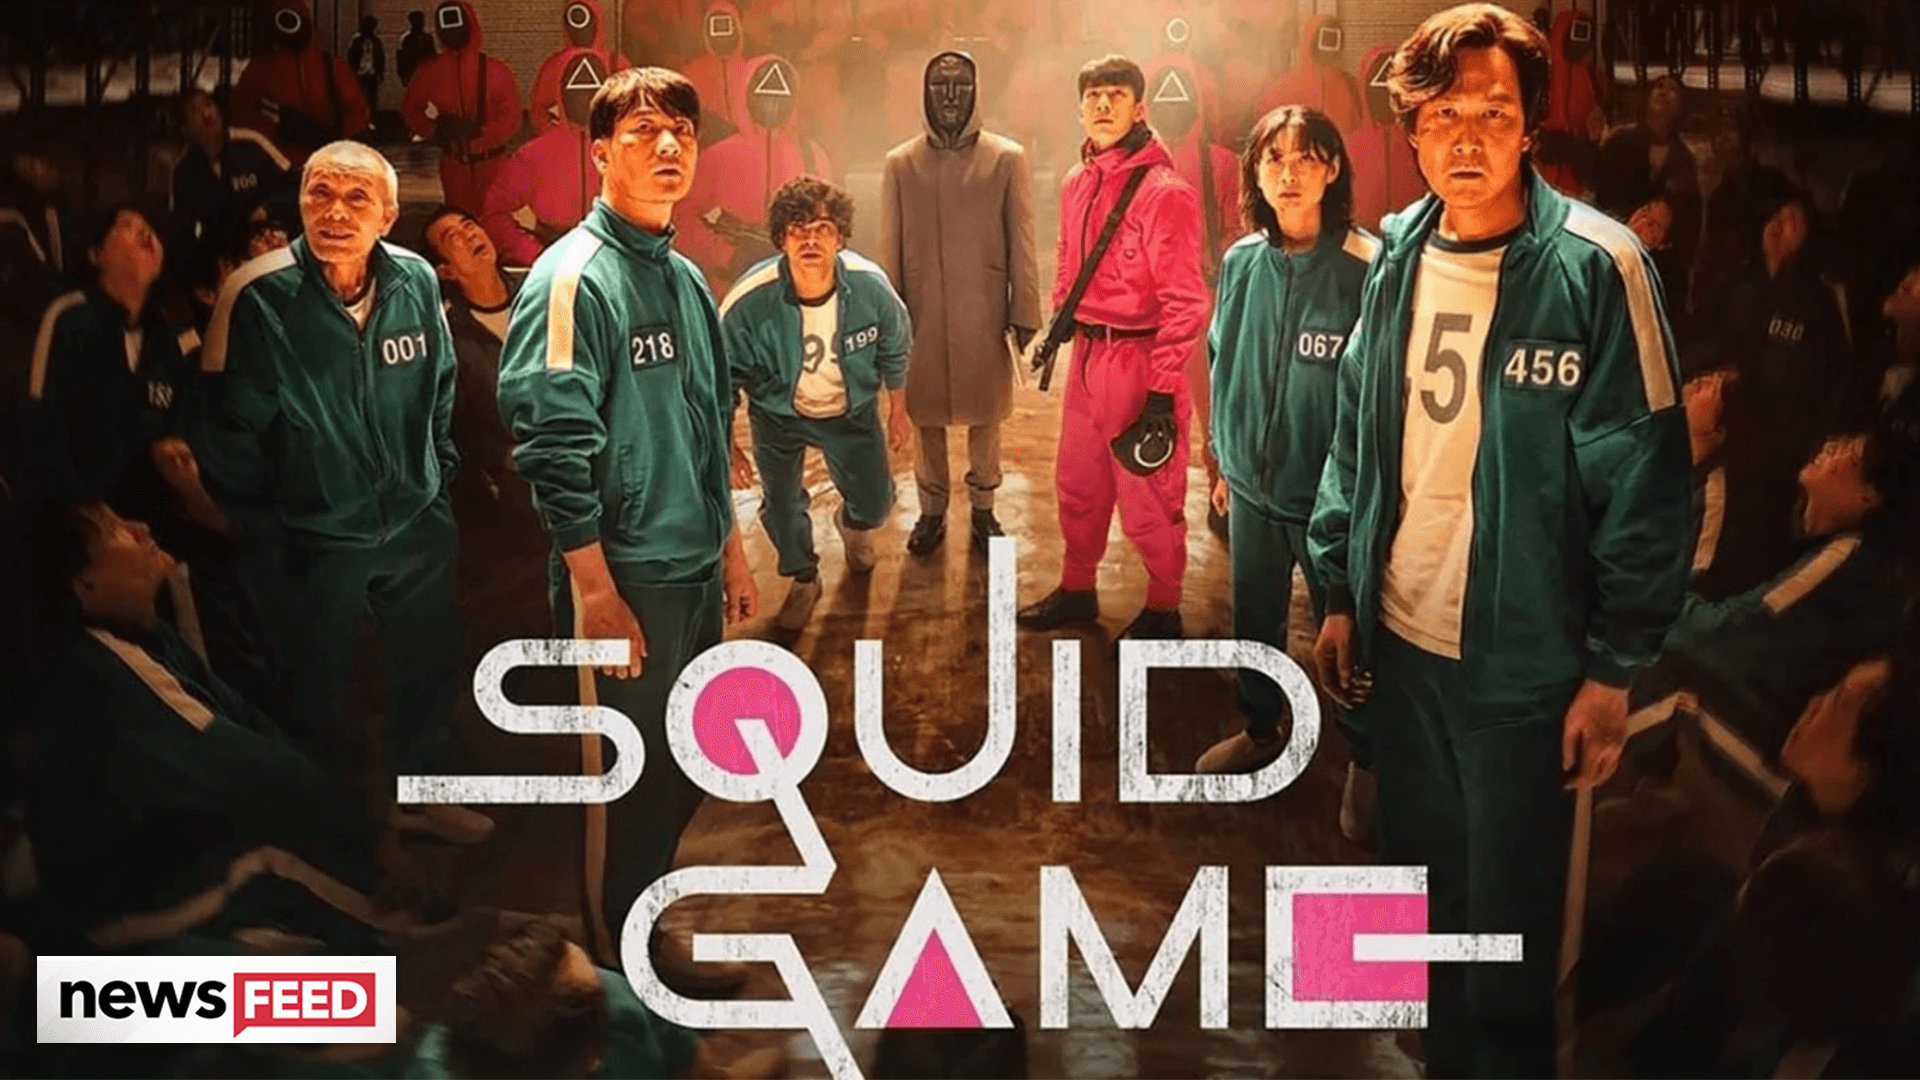 Is 'Squid Game' a Real Game? - Guidelines for Playing Every Game